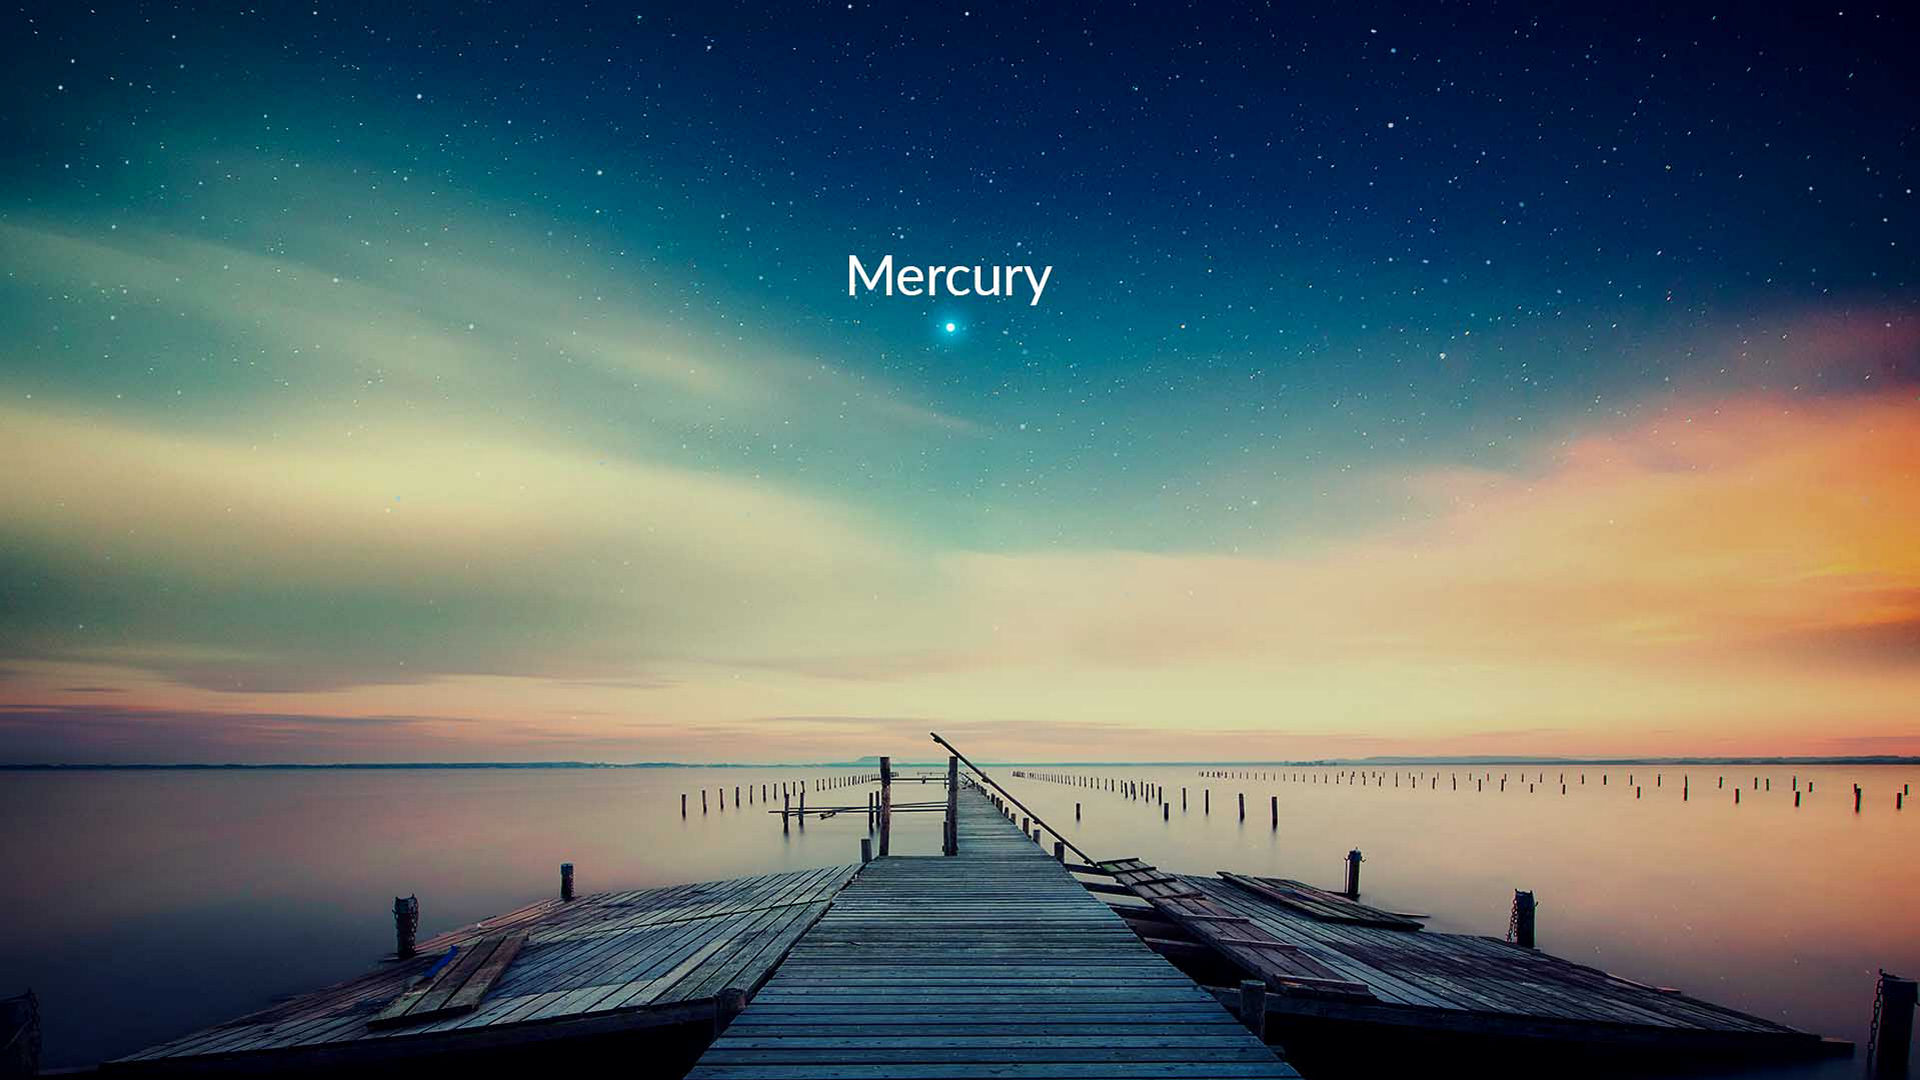 Mercury visible in the evening sky